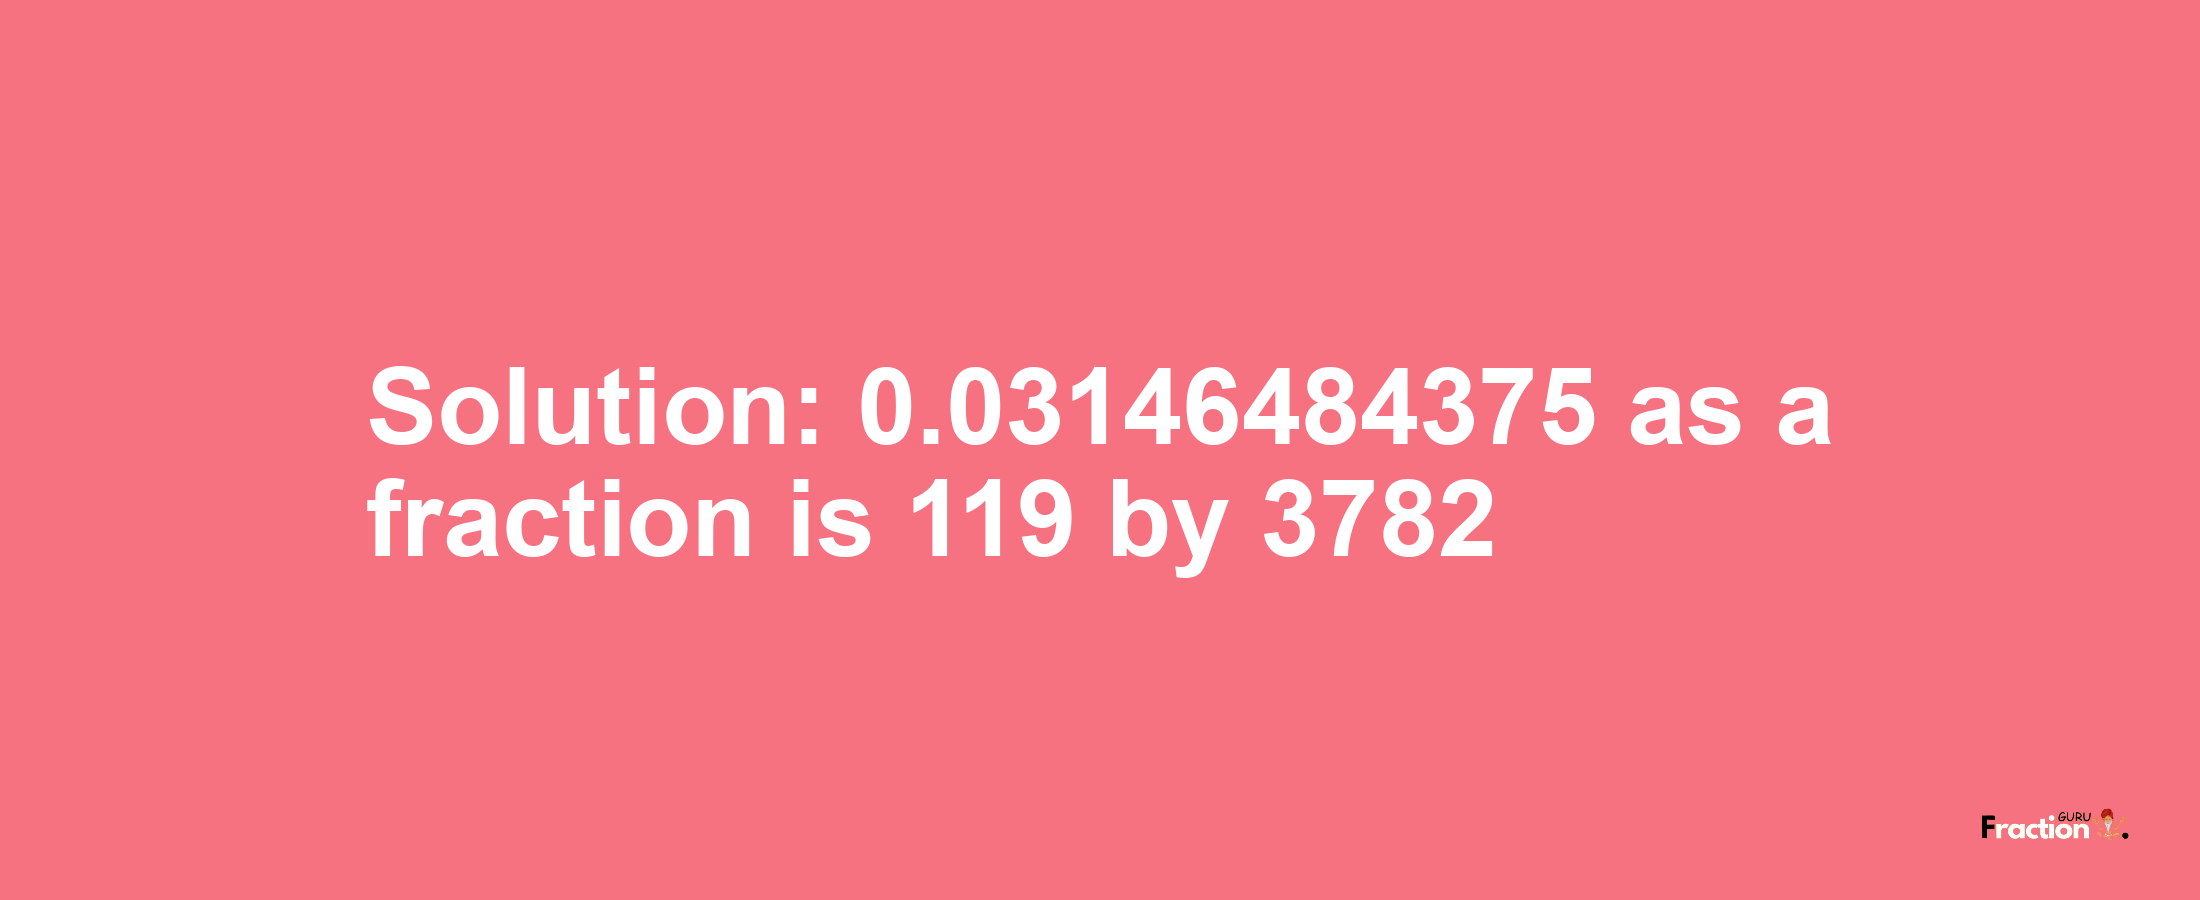 Solution:0.03146484375 as a fraction is 119/3782